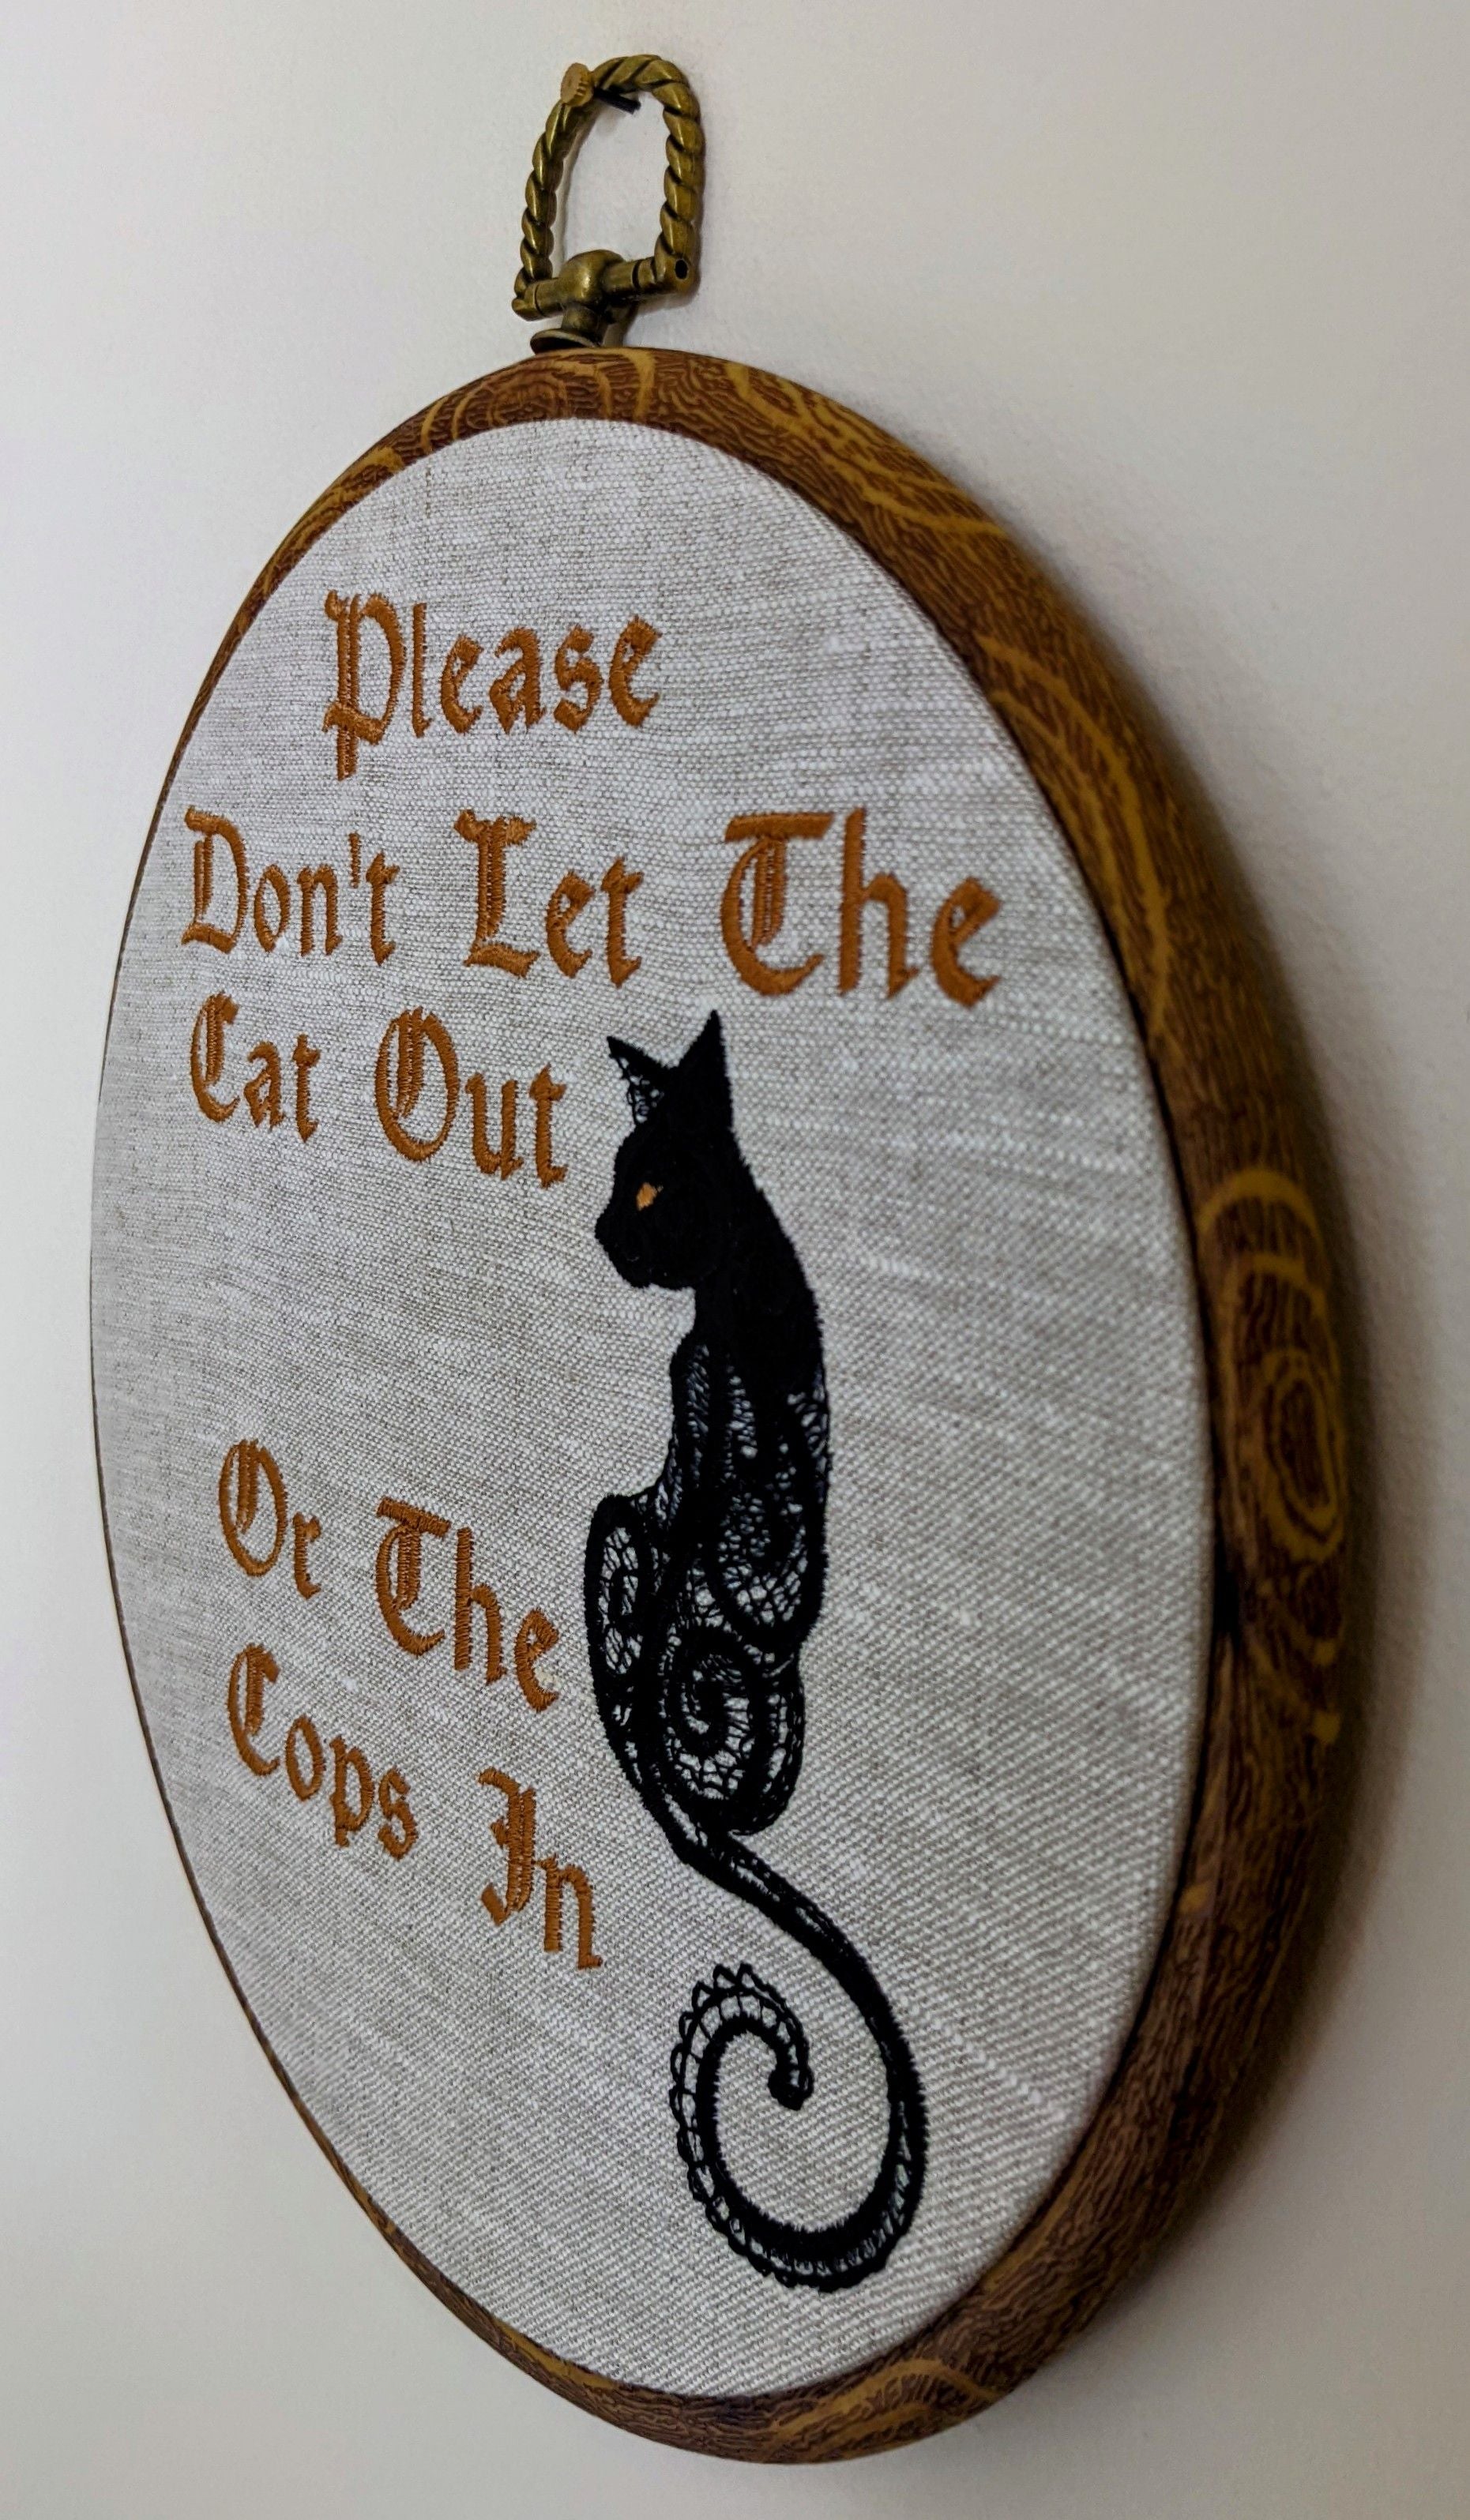 Please don't let the cat out or the cops in. Machine embroidery 8" hoop art